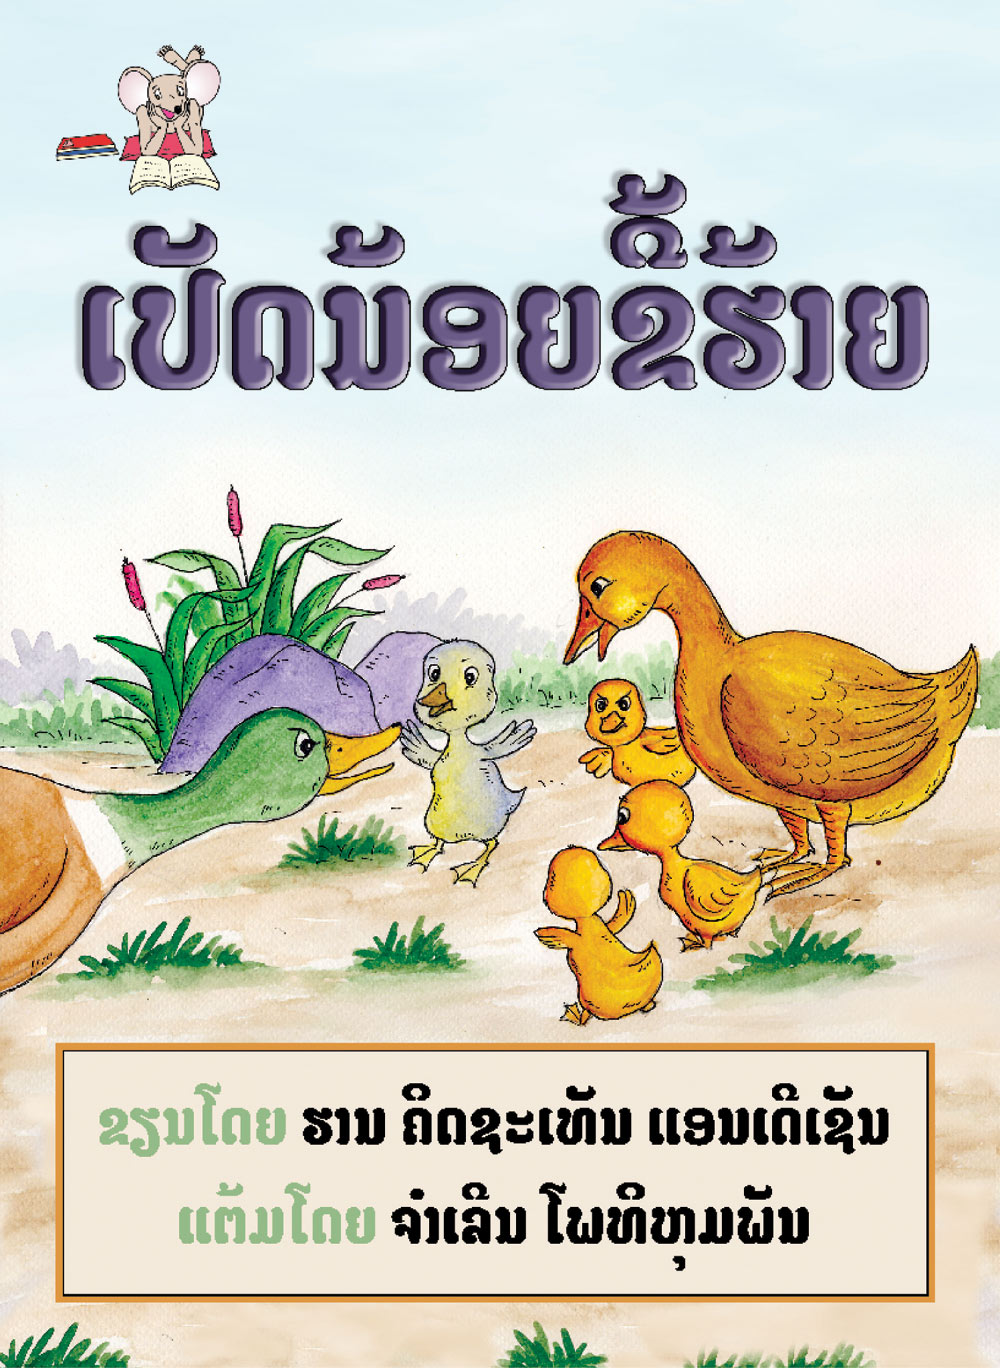 The Ugly Duckling large book cover, published in Lao language